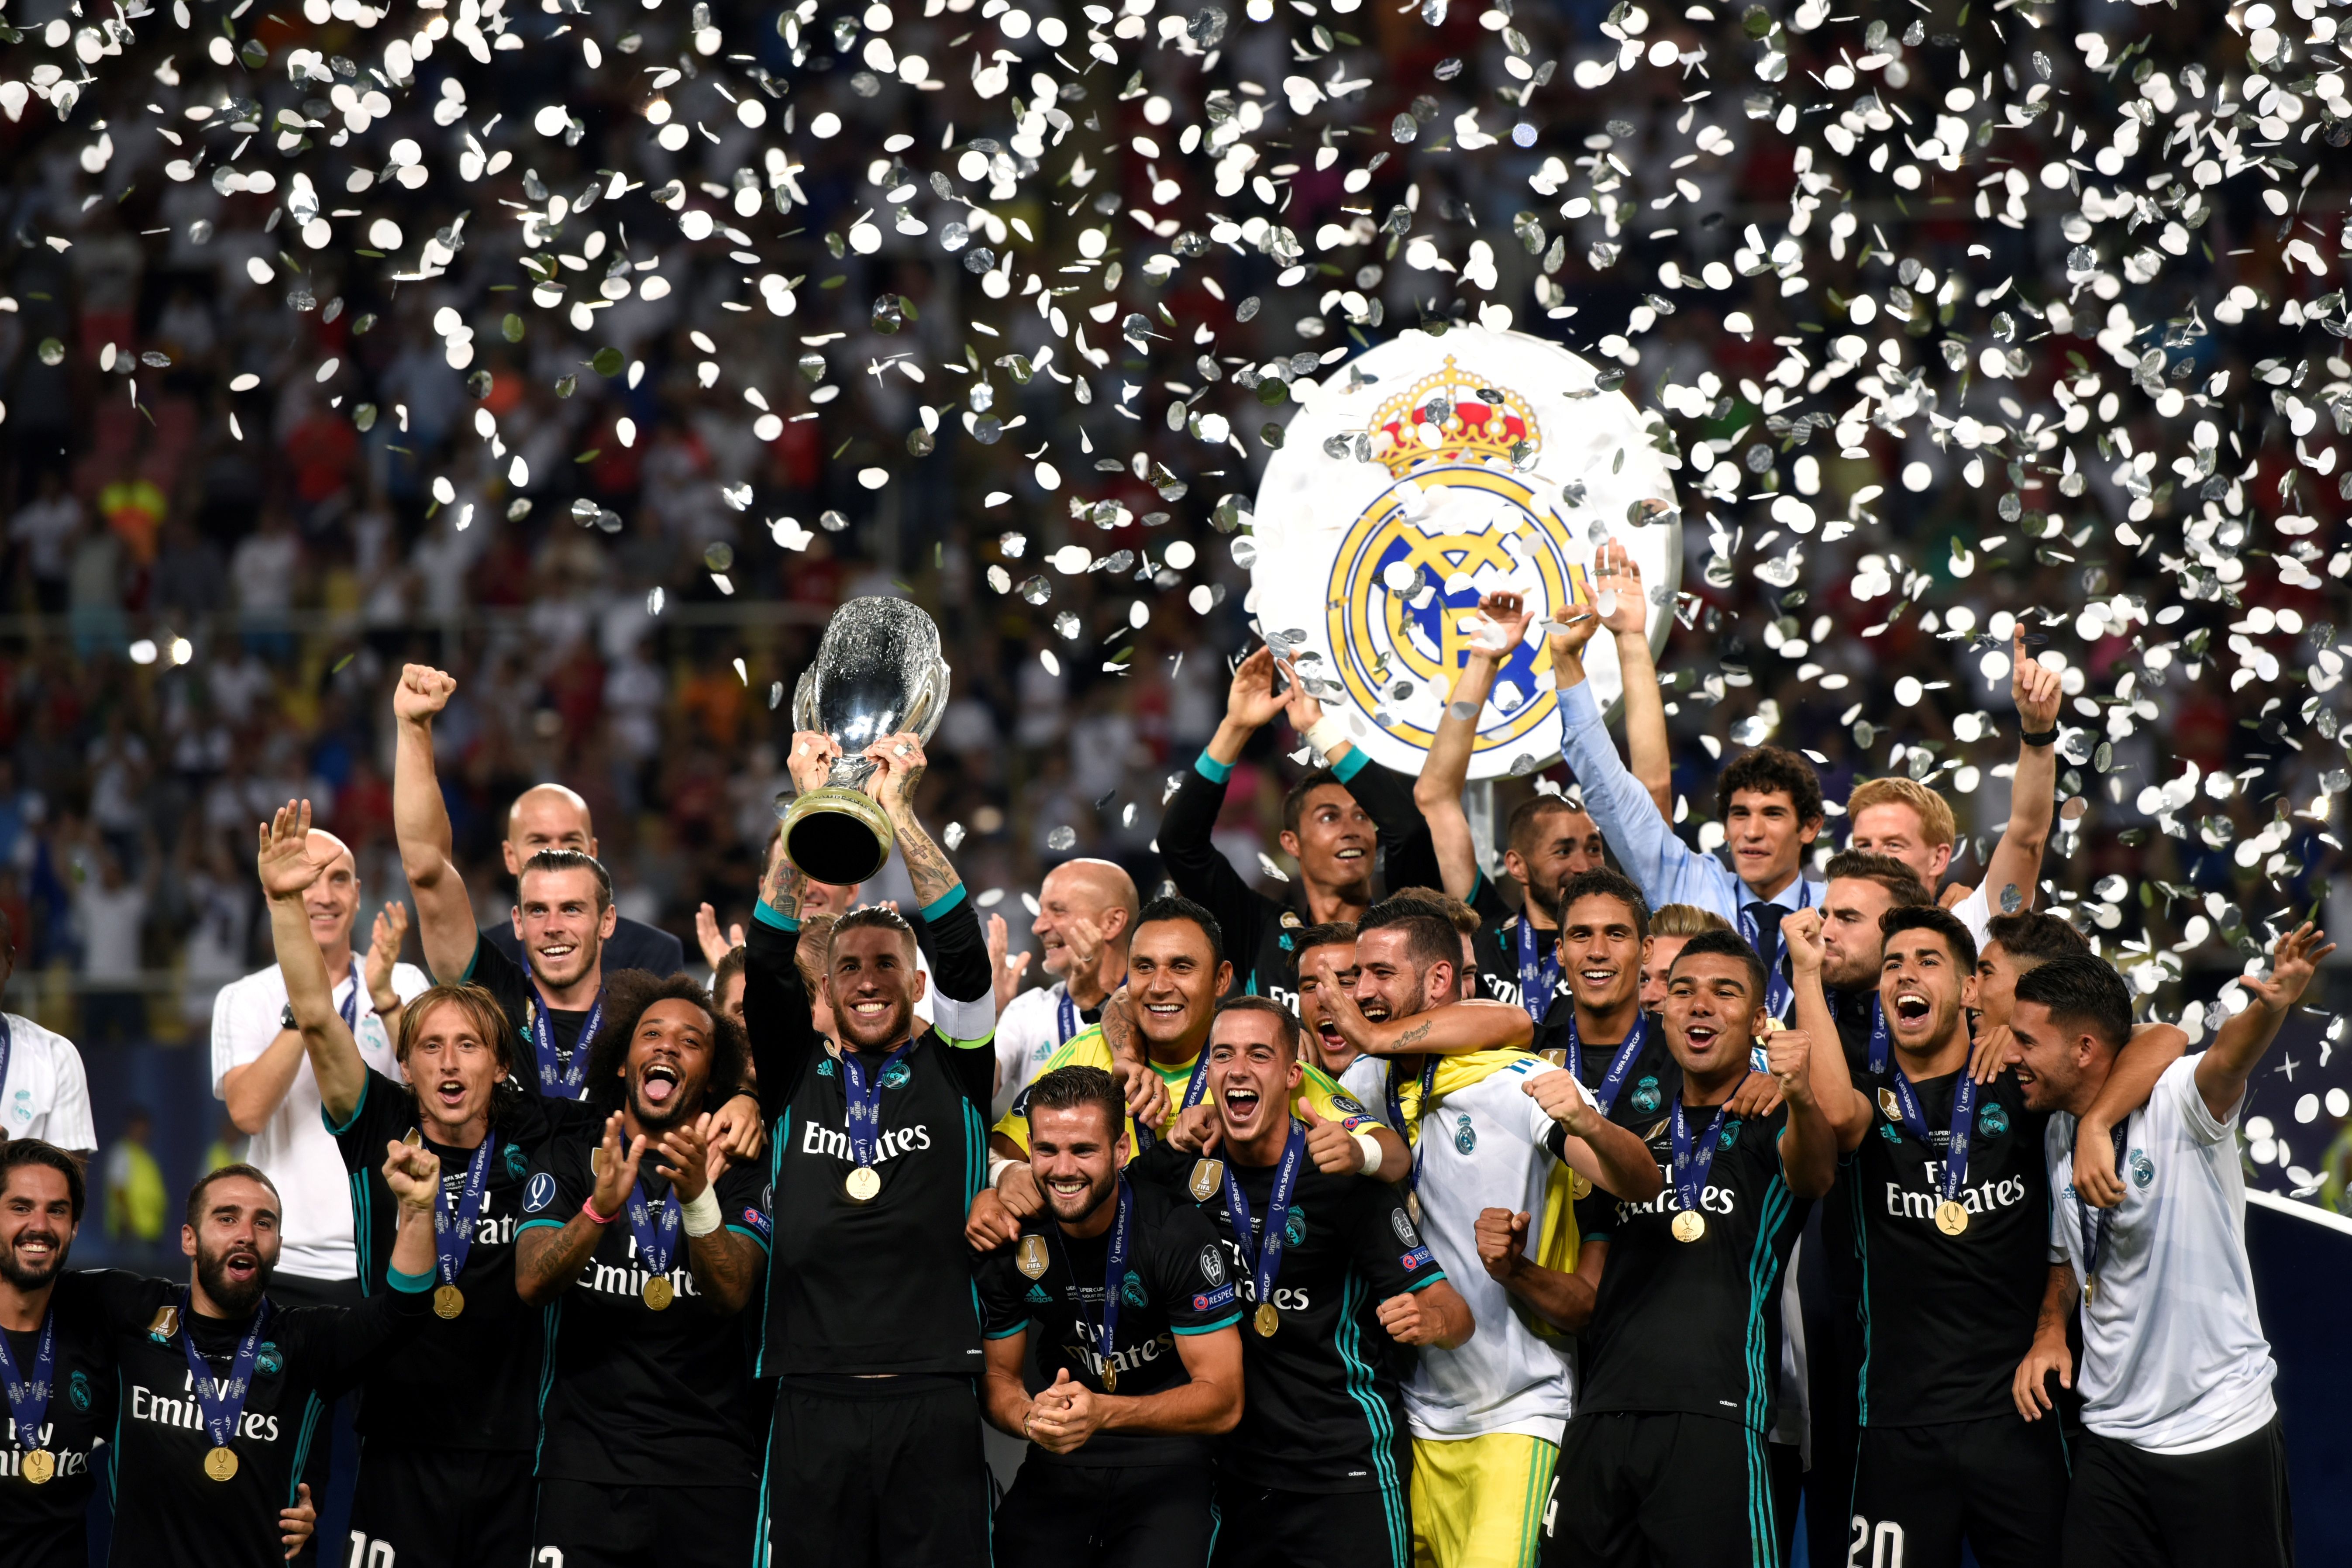 Real Madrid's Spanish defender Sergio Ramos (C) holds the trophy as he celebrates with teammates after winning the UEFA Super Cup final football match between Real Madrid and Manchester United on August 8, 2017, at the Philip II Arena in Skopje. / AFP PHOTO / Dimitar DILKOFF        (Photo credit should read DIMITAR DILKOFF/AFP/Getty Images)